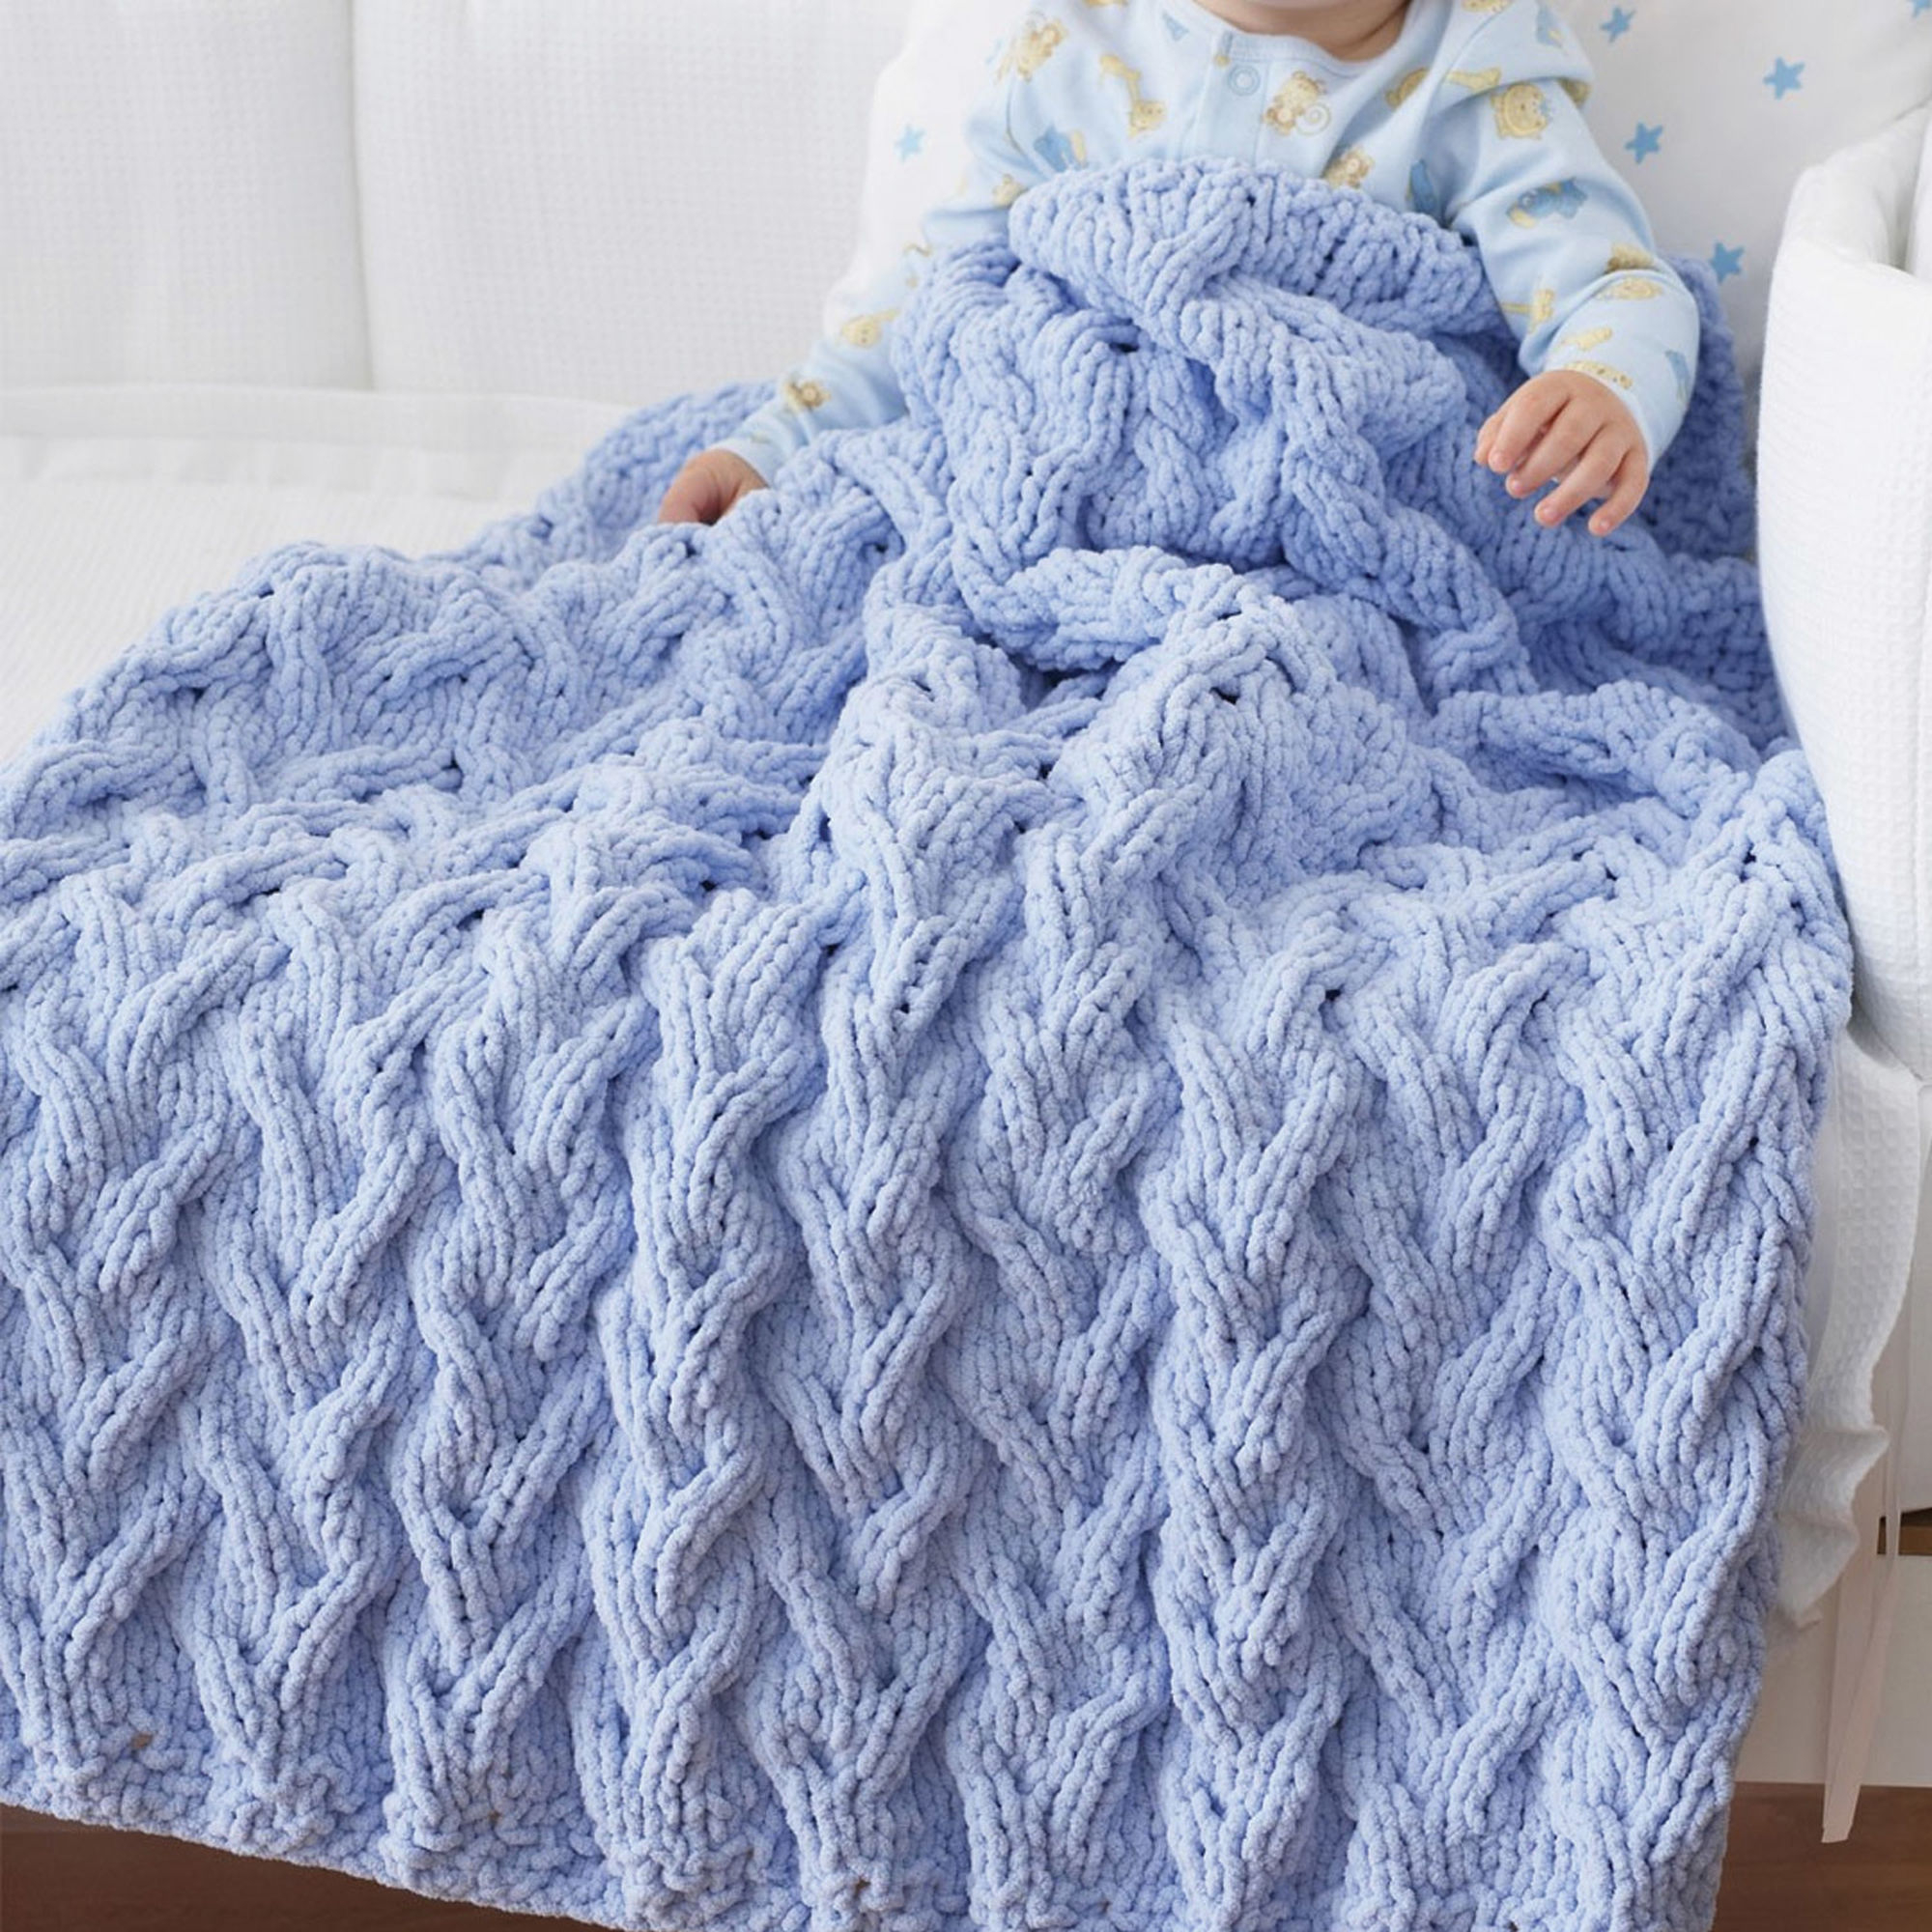 Free Knitting Patterns For Baby Blankets Lovely Cabled Ba Blanket Free Knitting Pattern